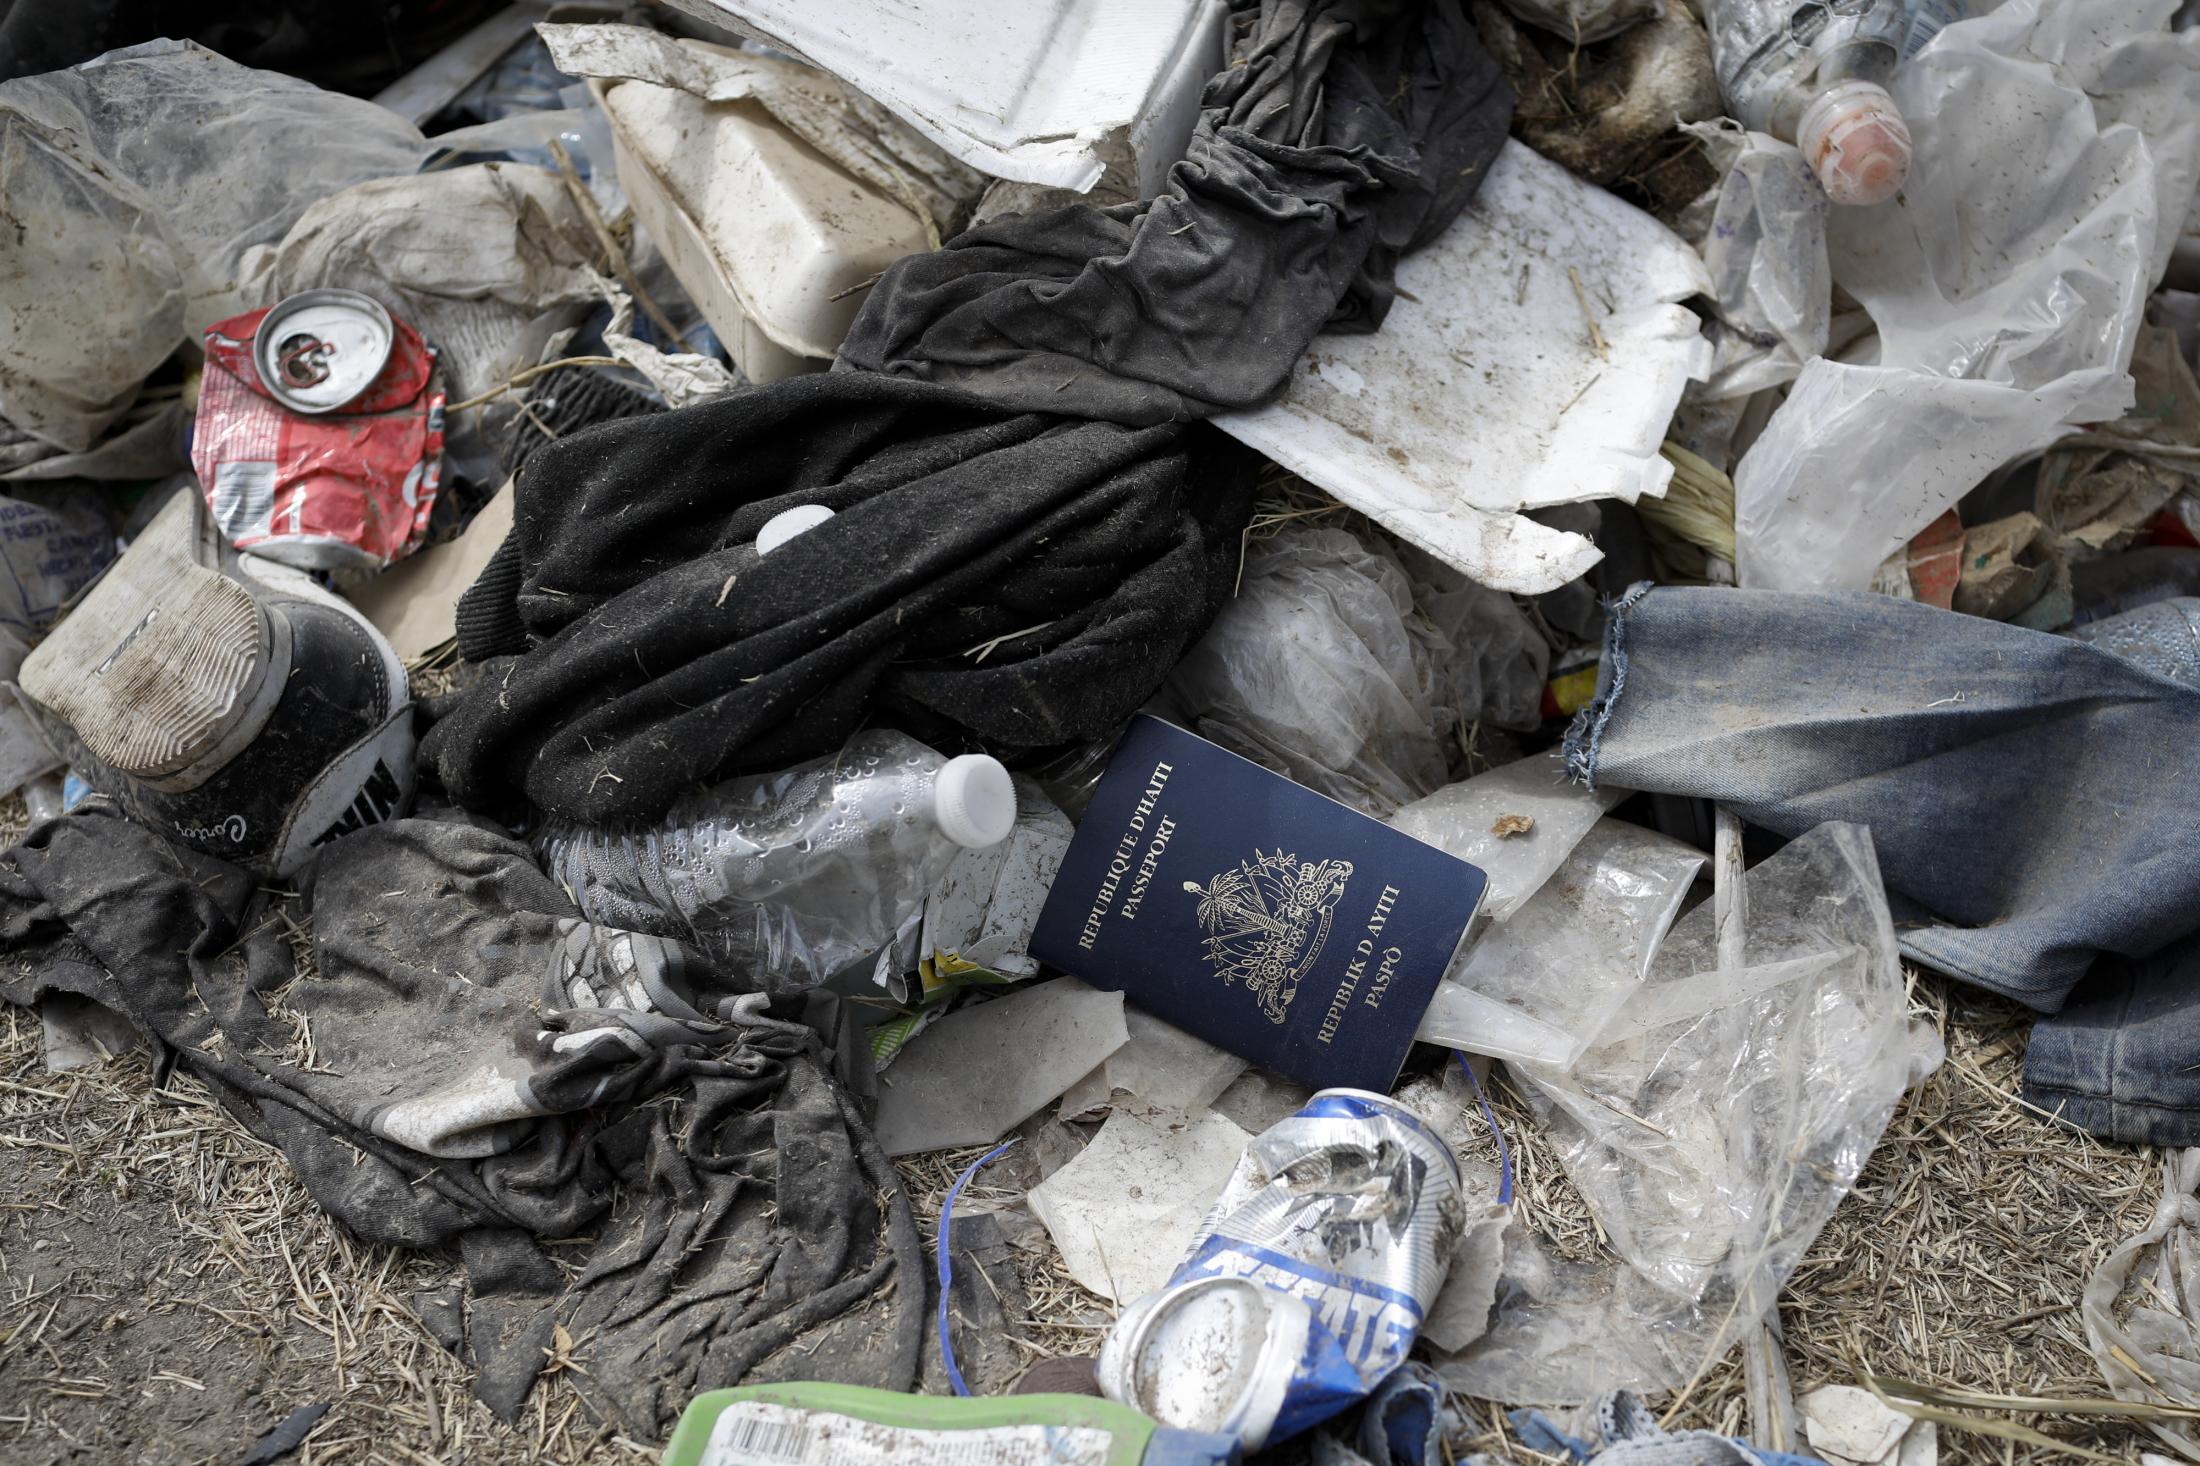 A Haitian passport is seen in a pile of trash near the International Bridge between Mexico and the U.S., where migrants seeking asylum in the U.S. are waiting to be processed, in Del Rio, Texas, U.S., September 21, 2021. REUTERS/Marco Bello